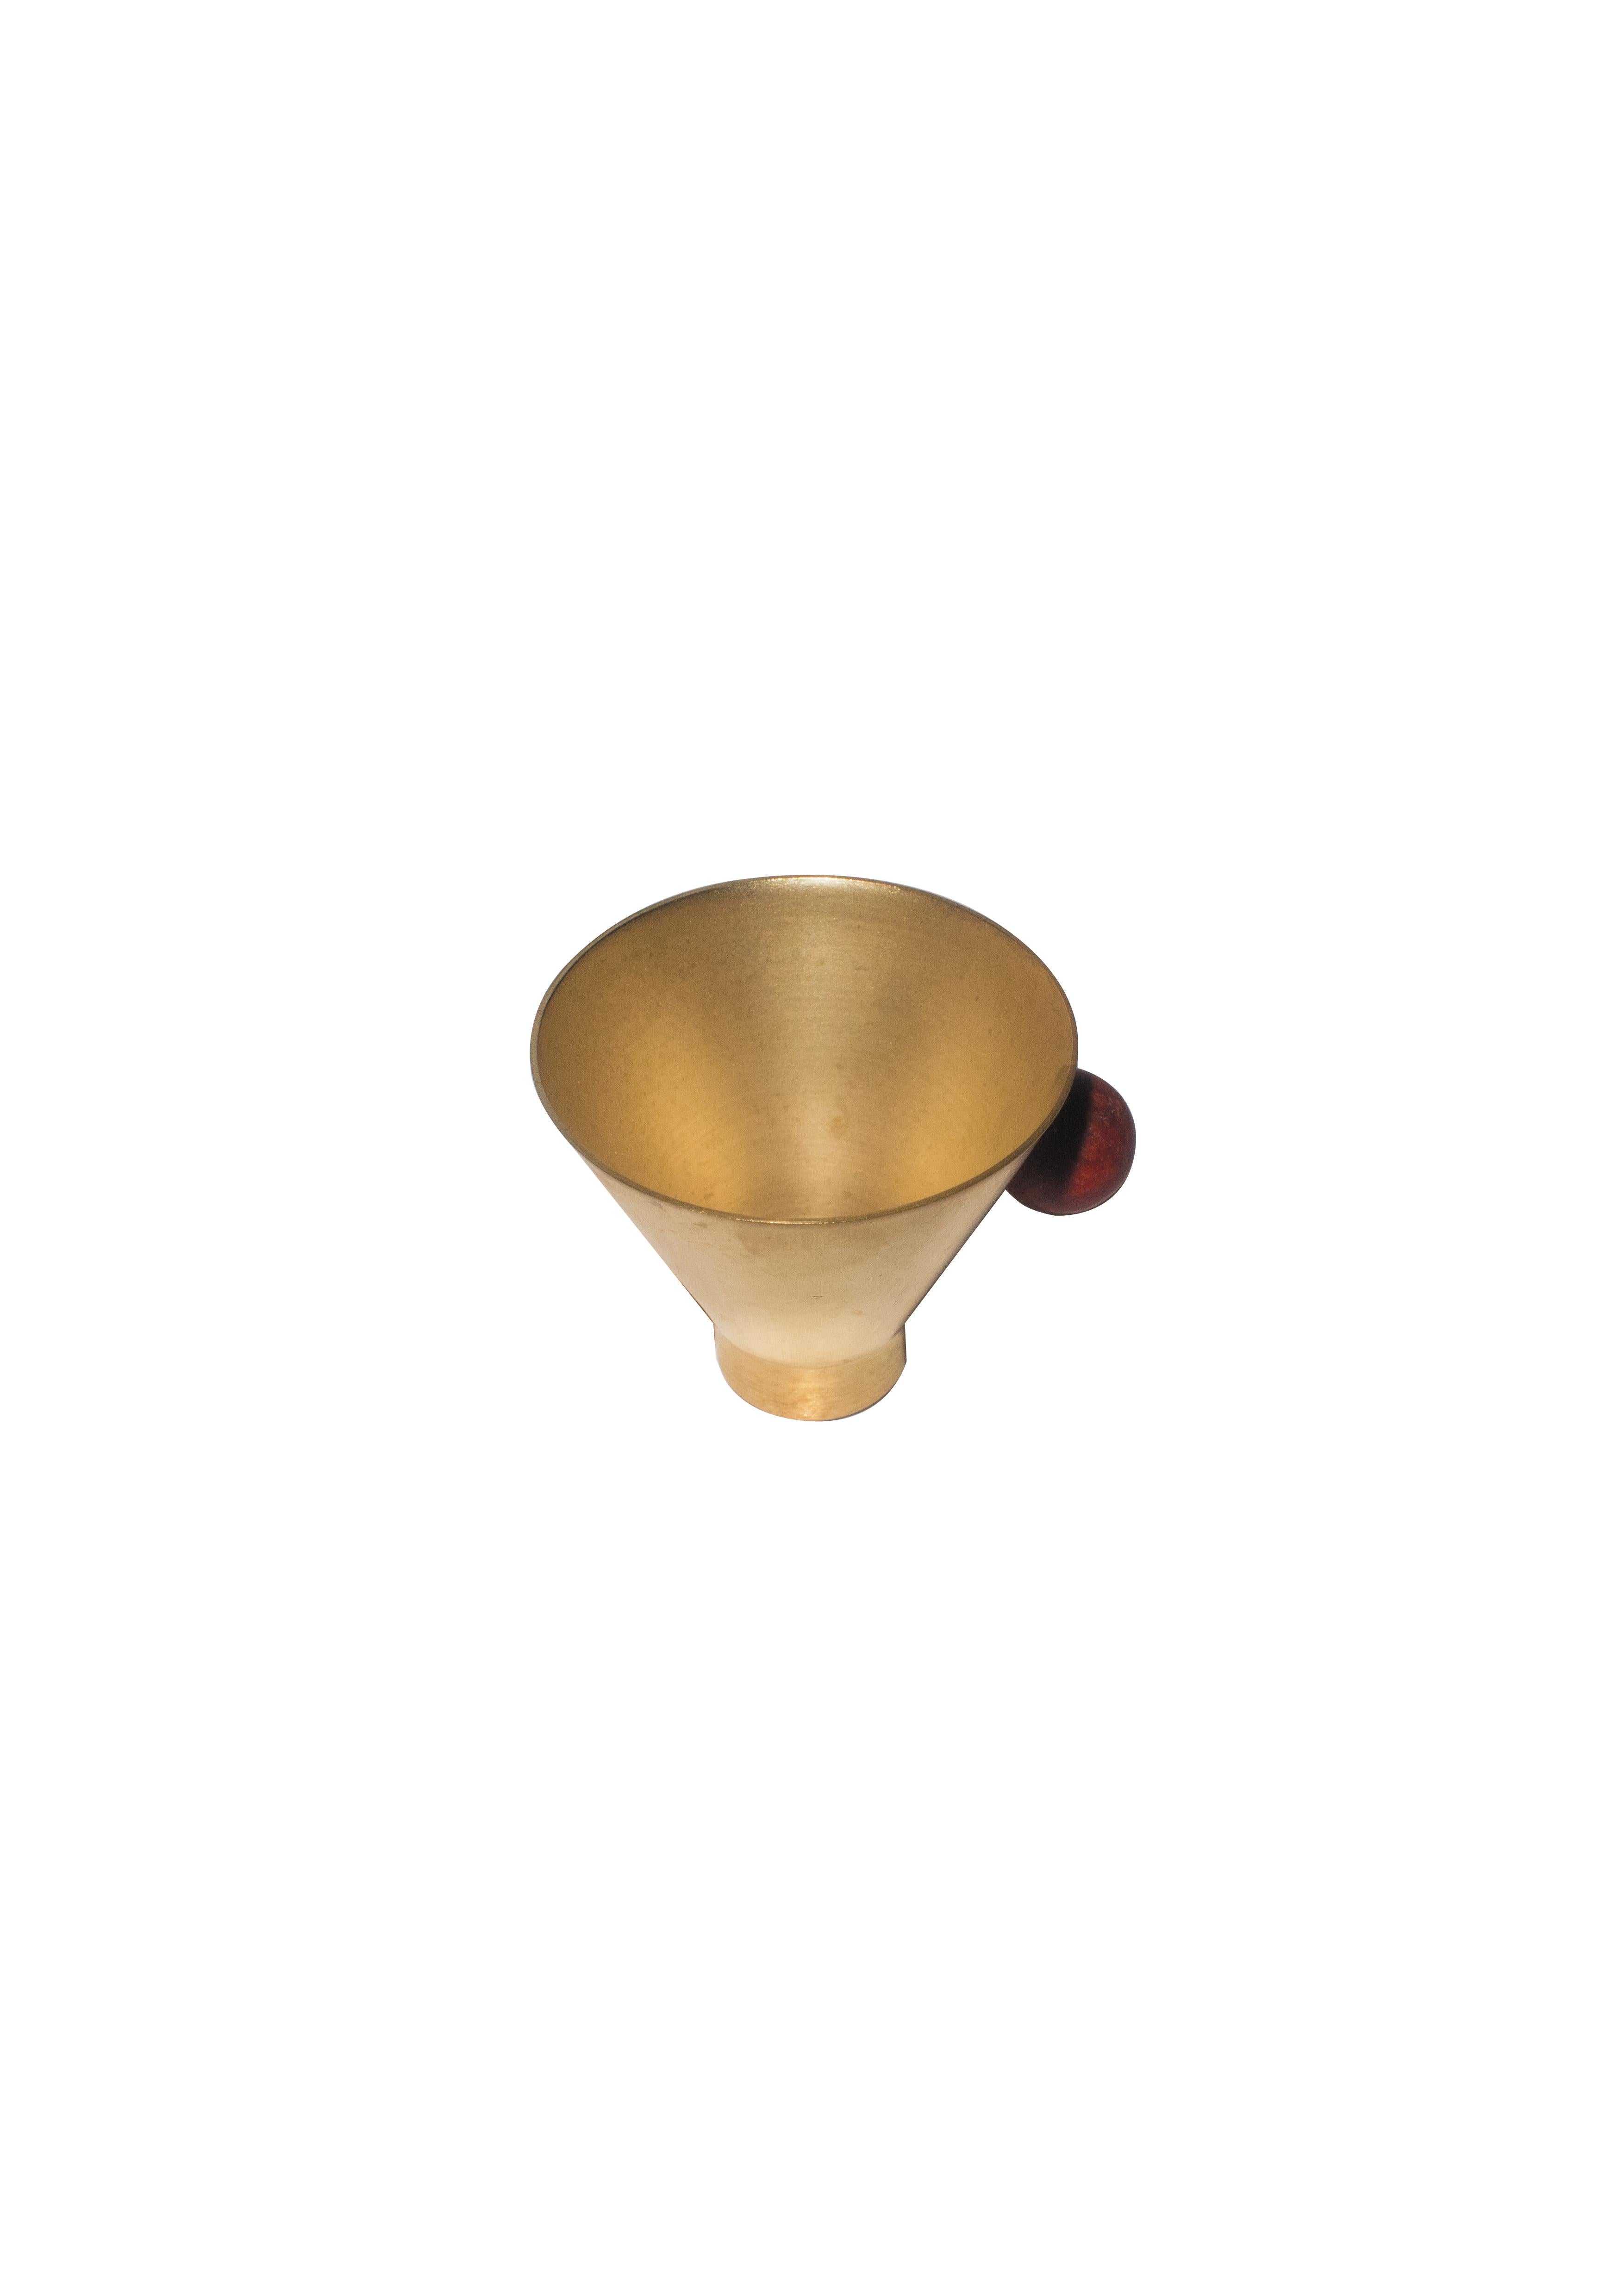 Italian Contemporary Gold Plated Red Stone Cone Cup Handcrafted Italy by Natalia Criado For Sale